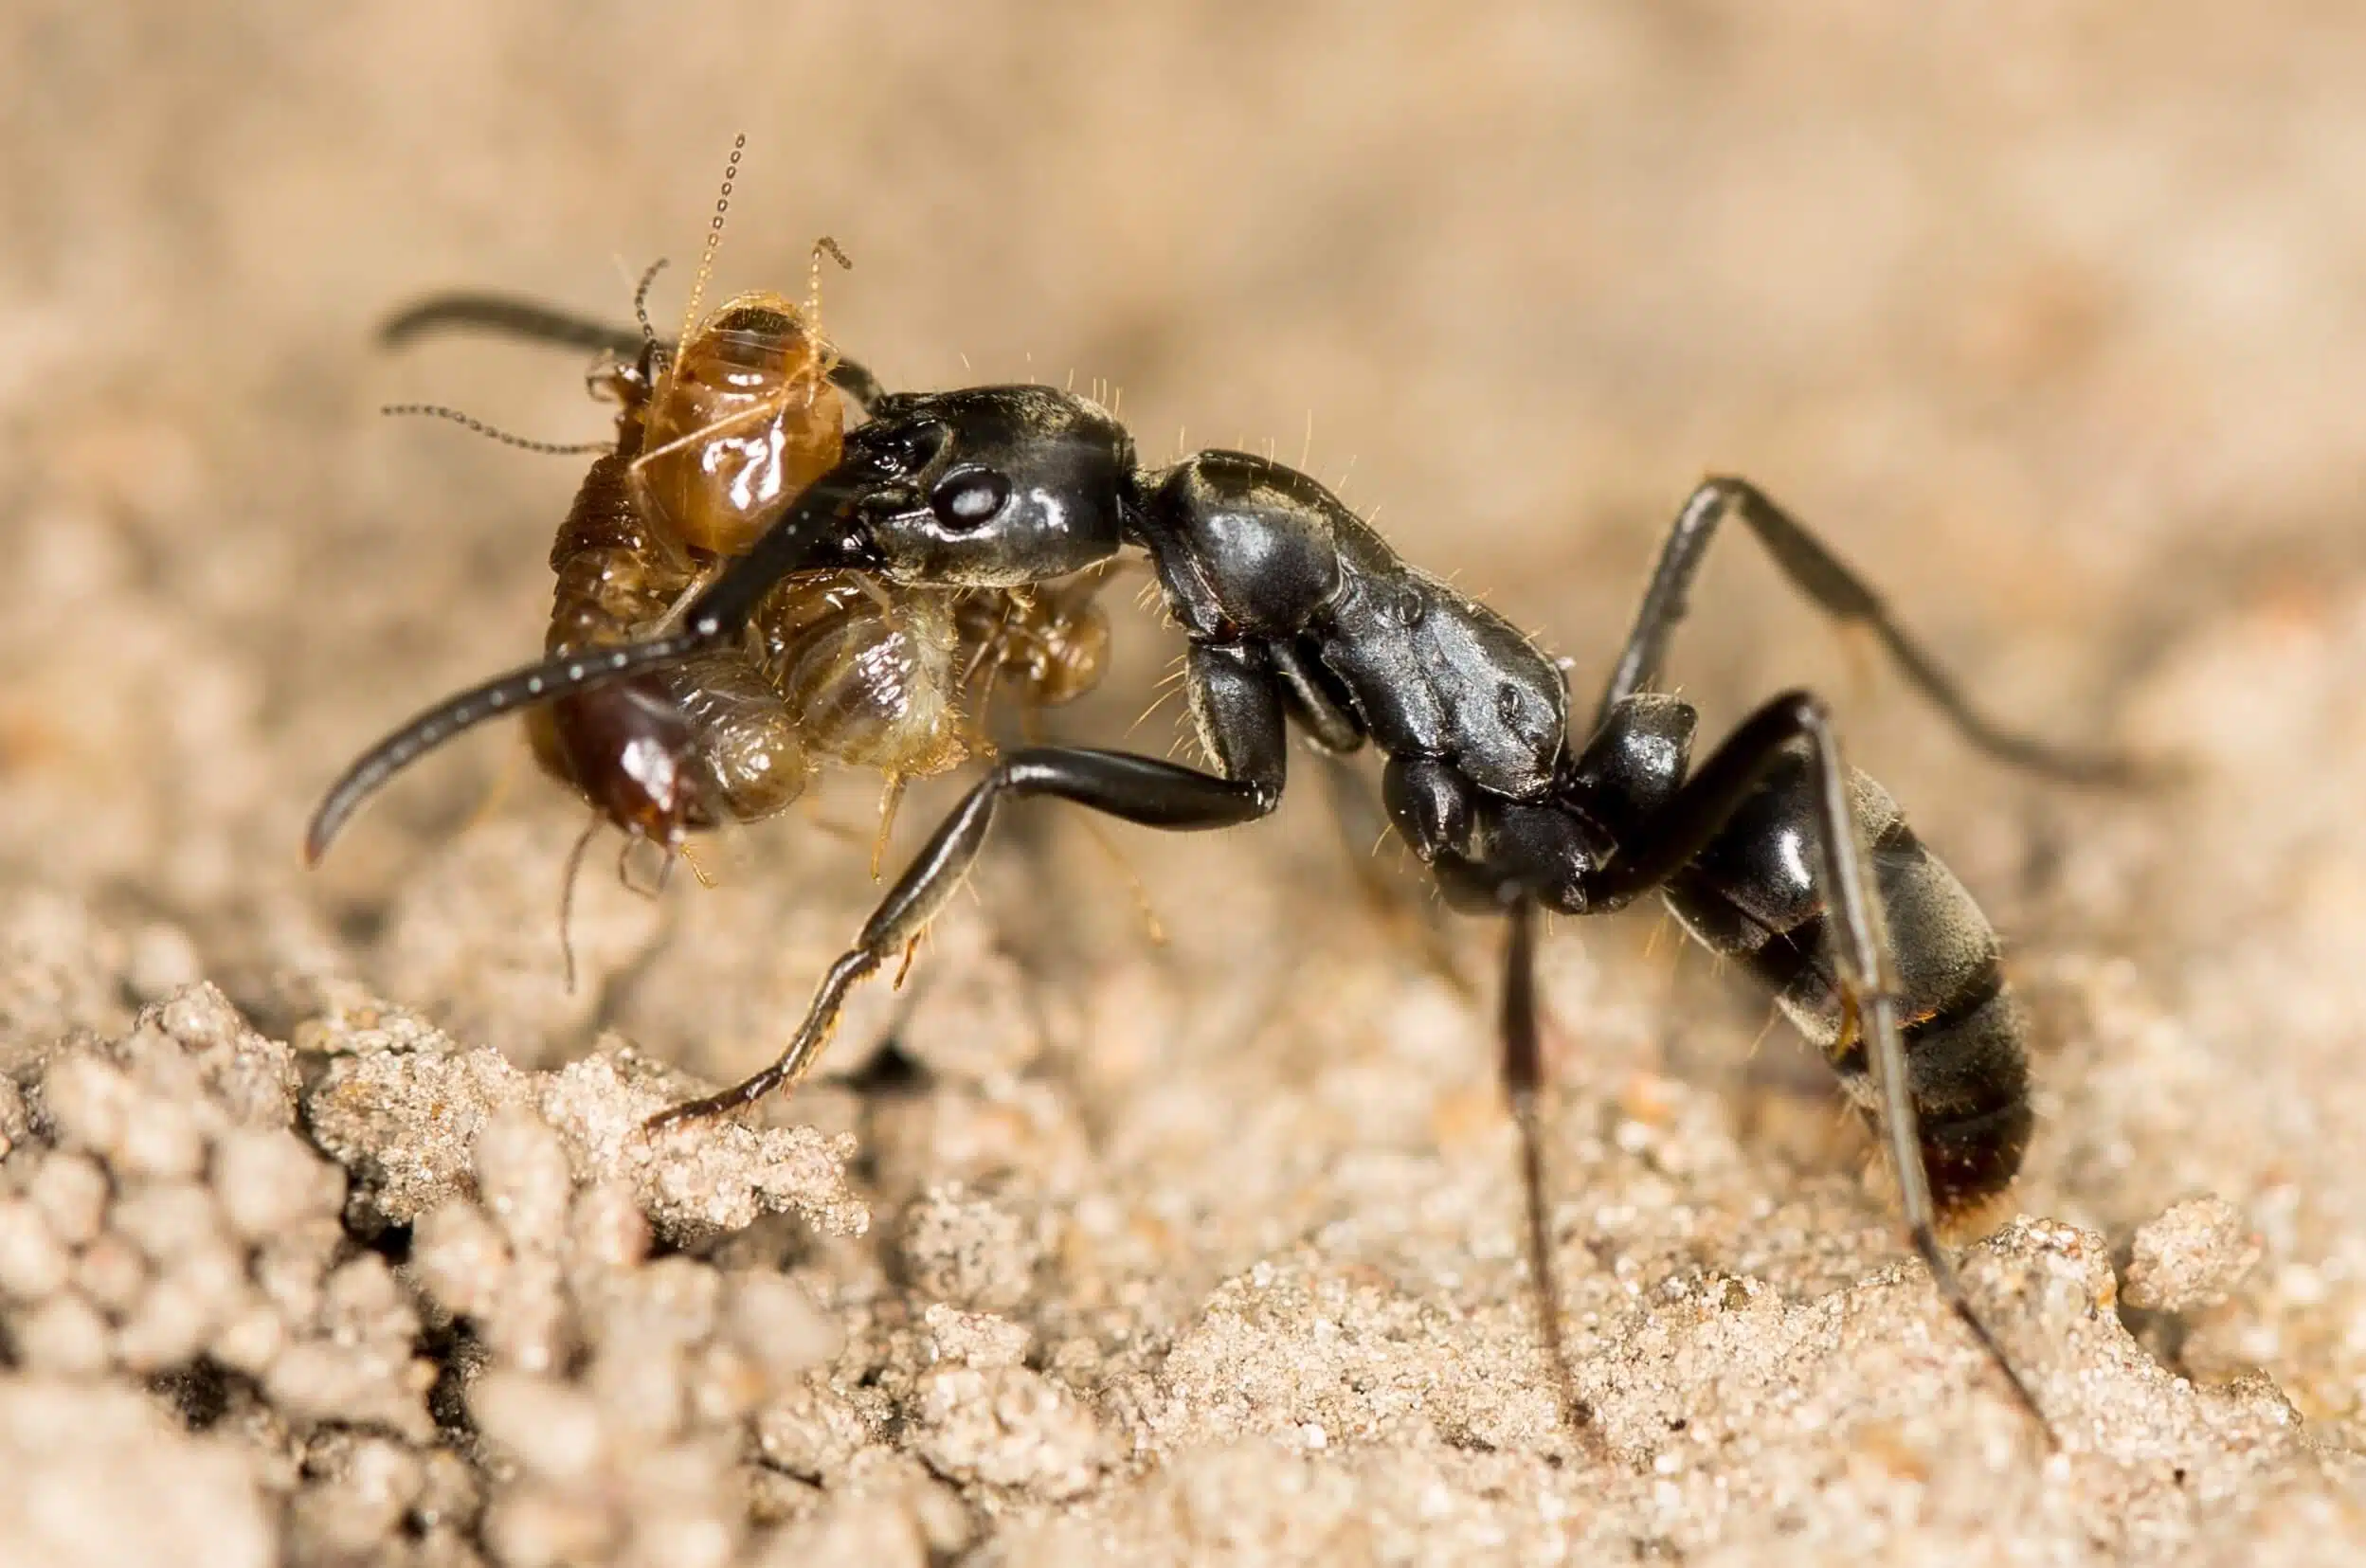 The dedicated treatment manages to save the lives of no less than 90 percent of the injured ants. Magfonera analis ant with termites, photo: ETF89, CC BY-SA 4.0